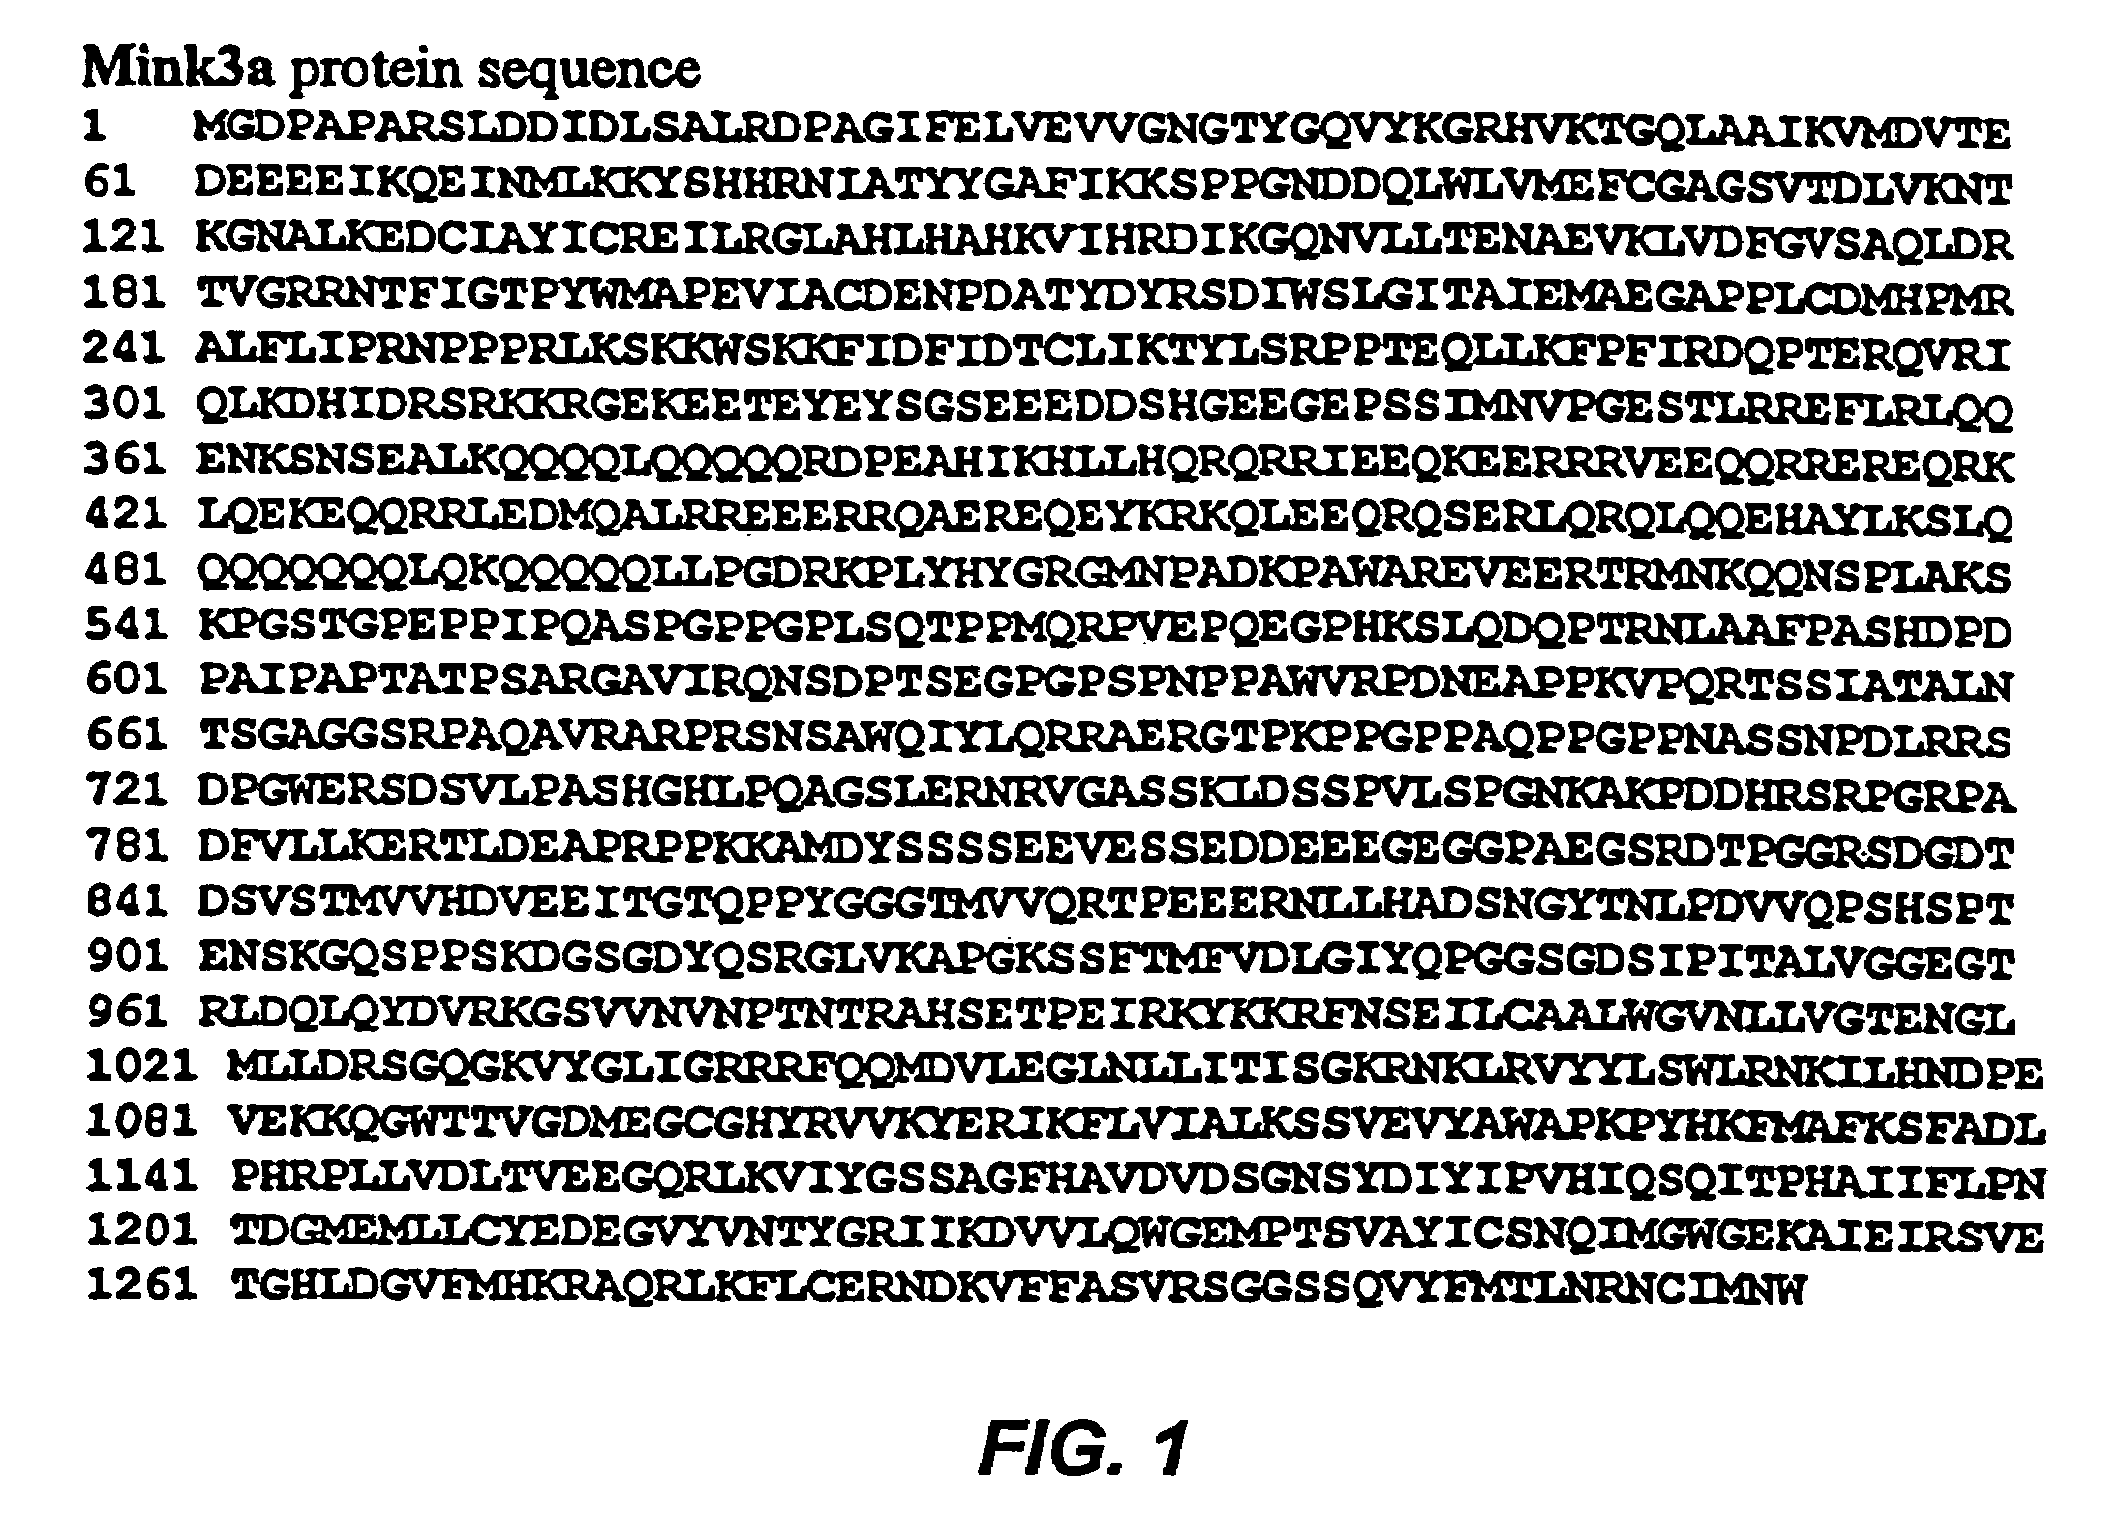 Germinal center kinase proteins, compositions, and methods of use